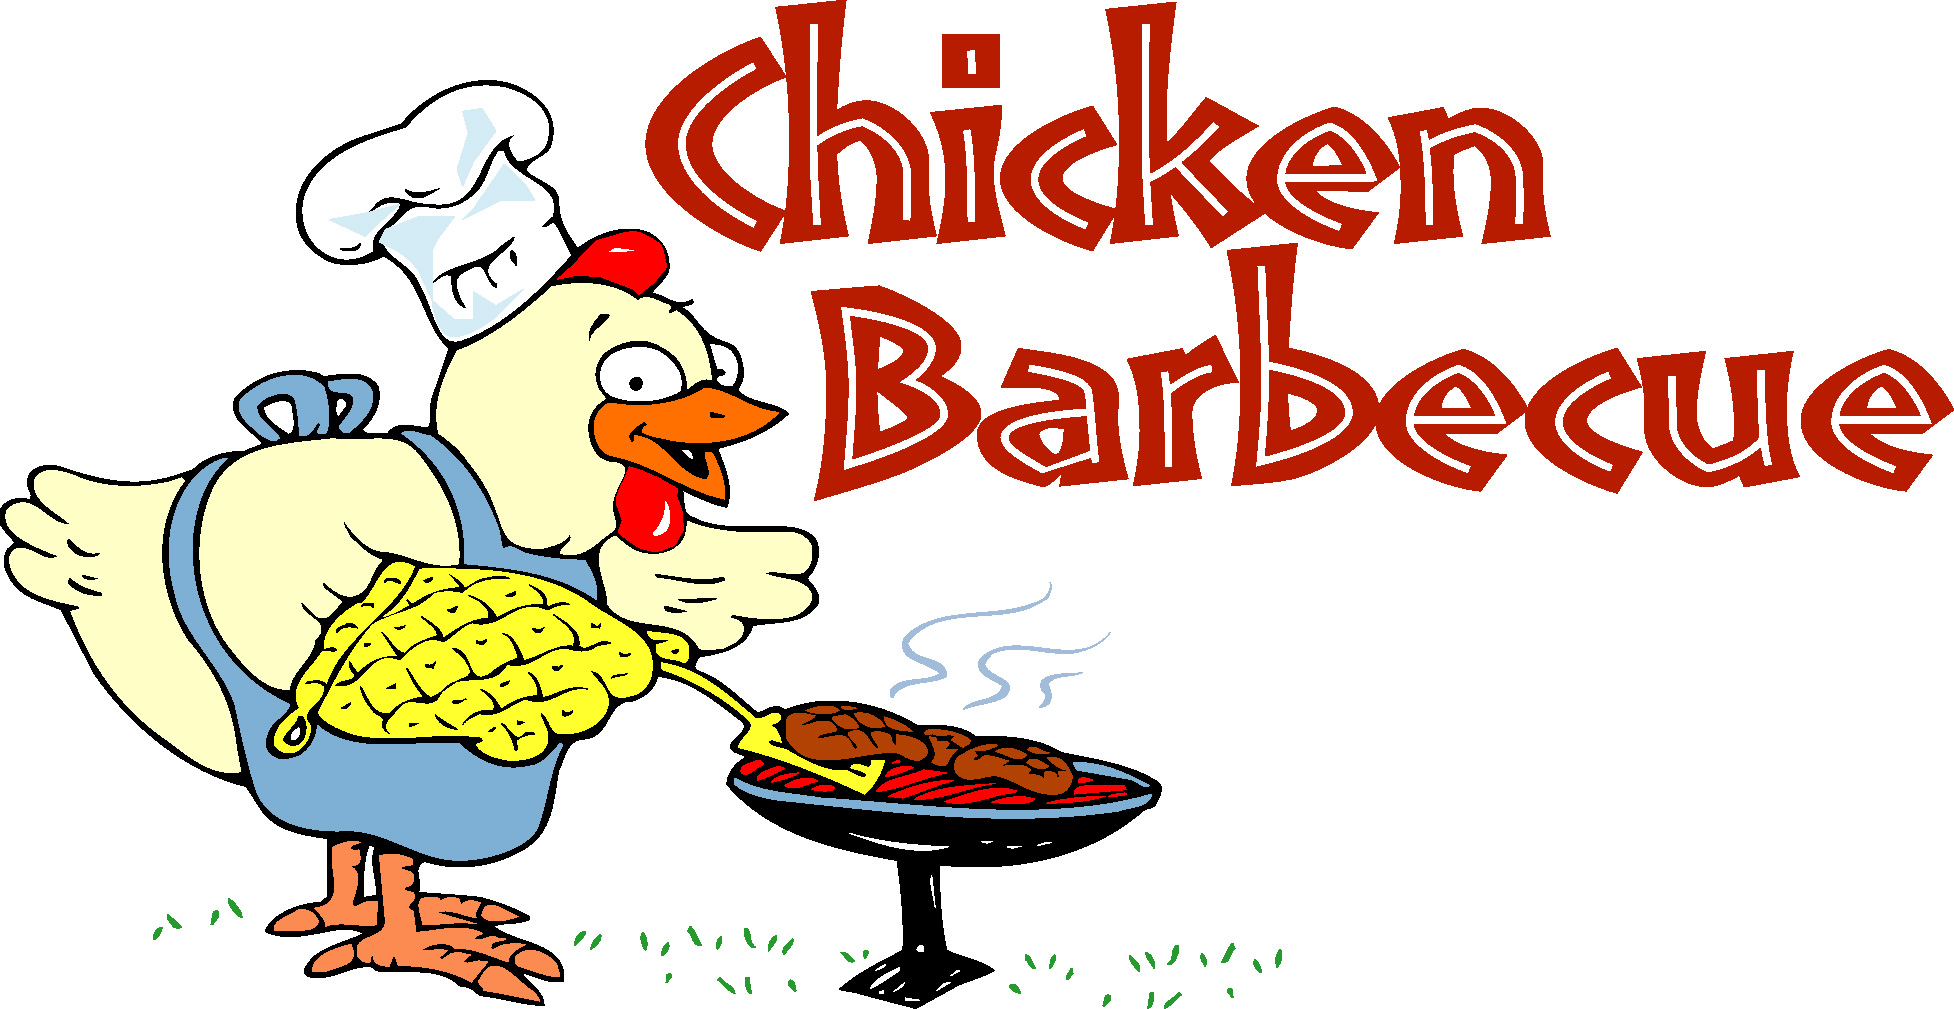 Bbq clip art chicken bbq clipart cliparts for you